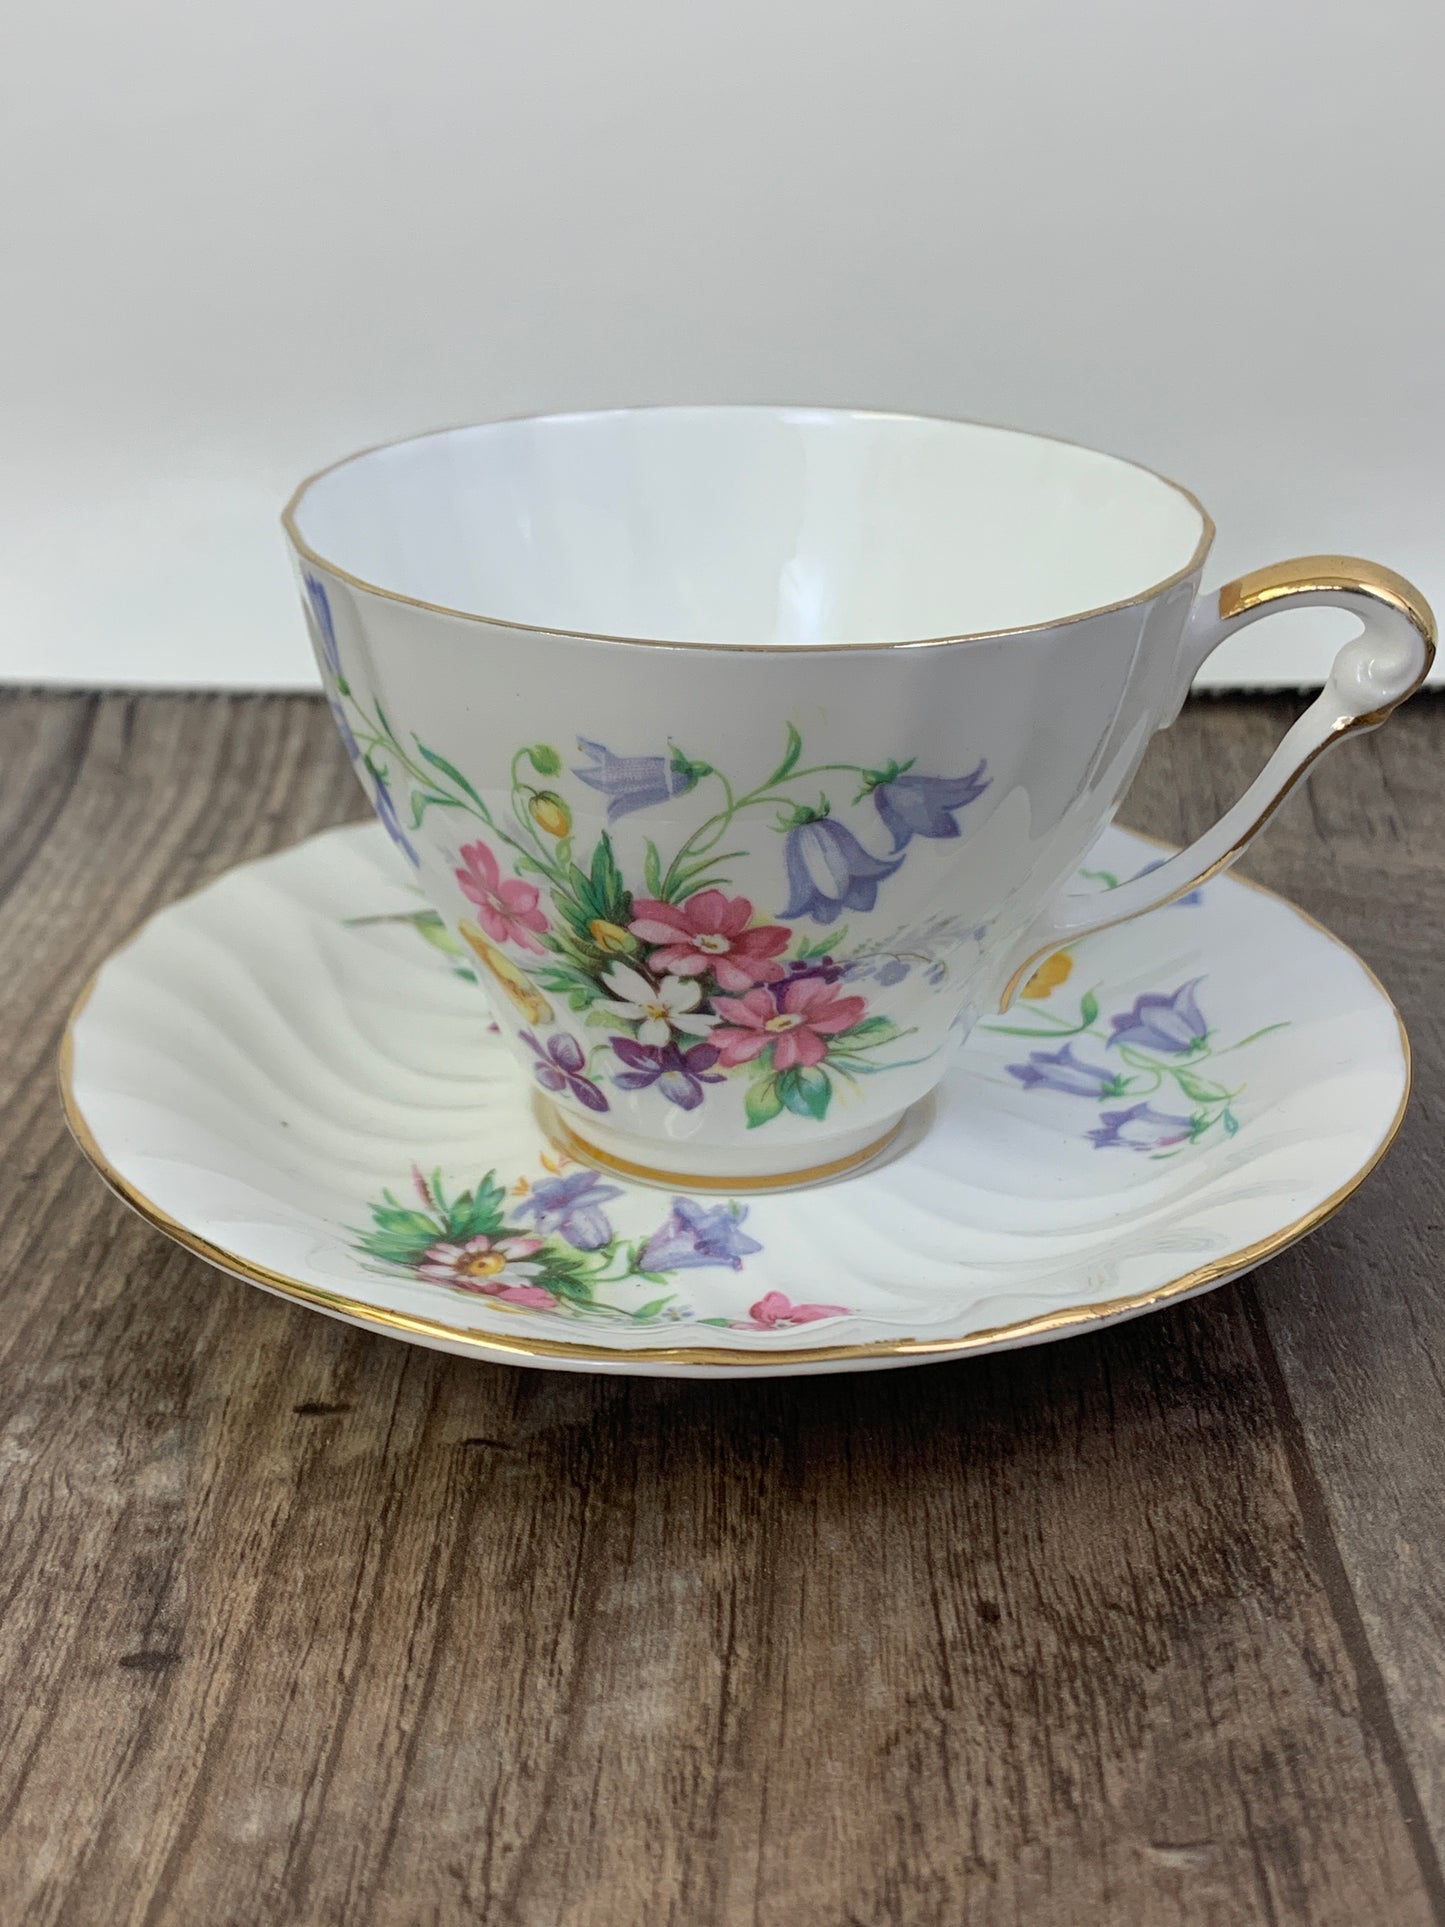 White Vintage Teacup with Floral Pattern Swirled Rib Colourful Flowers